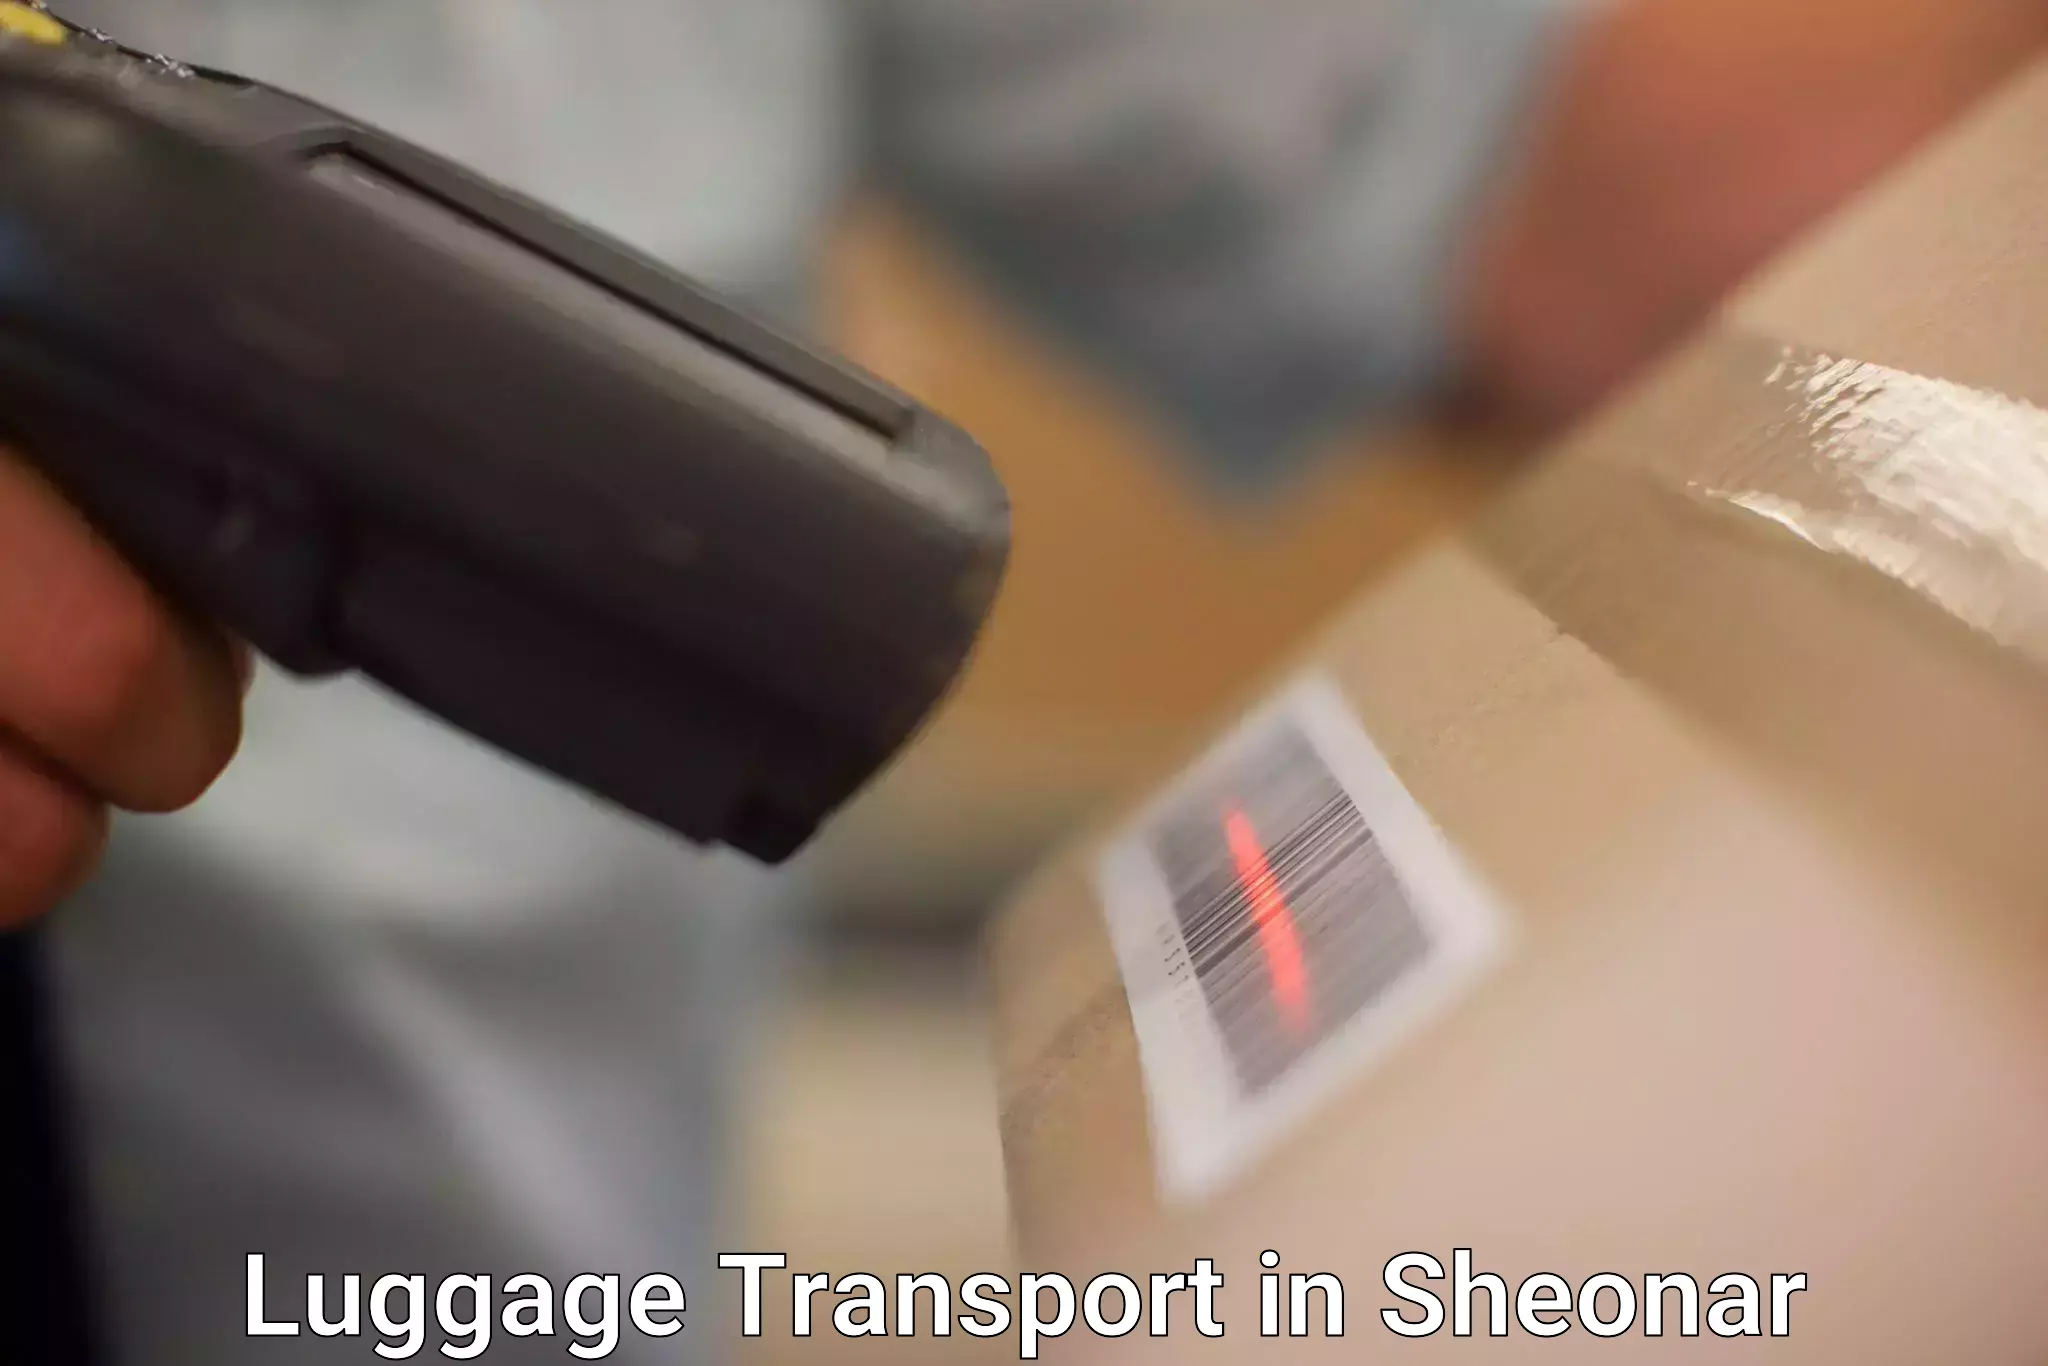 Premium luggage delivery in Sheonar